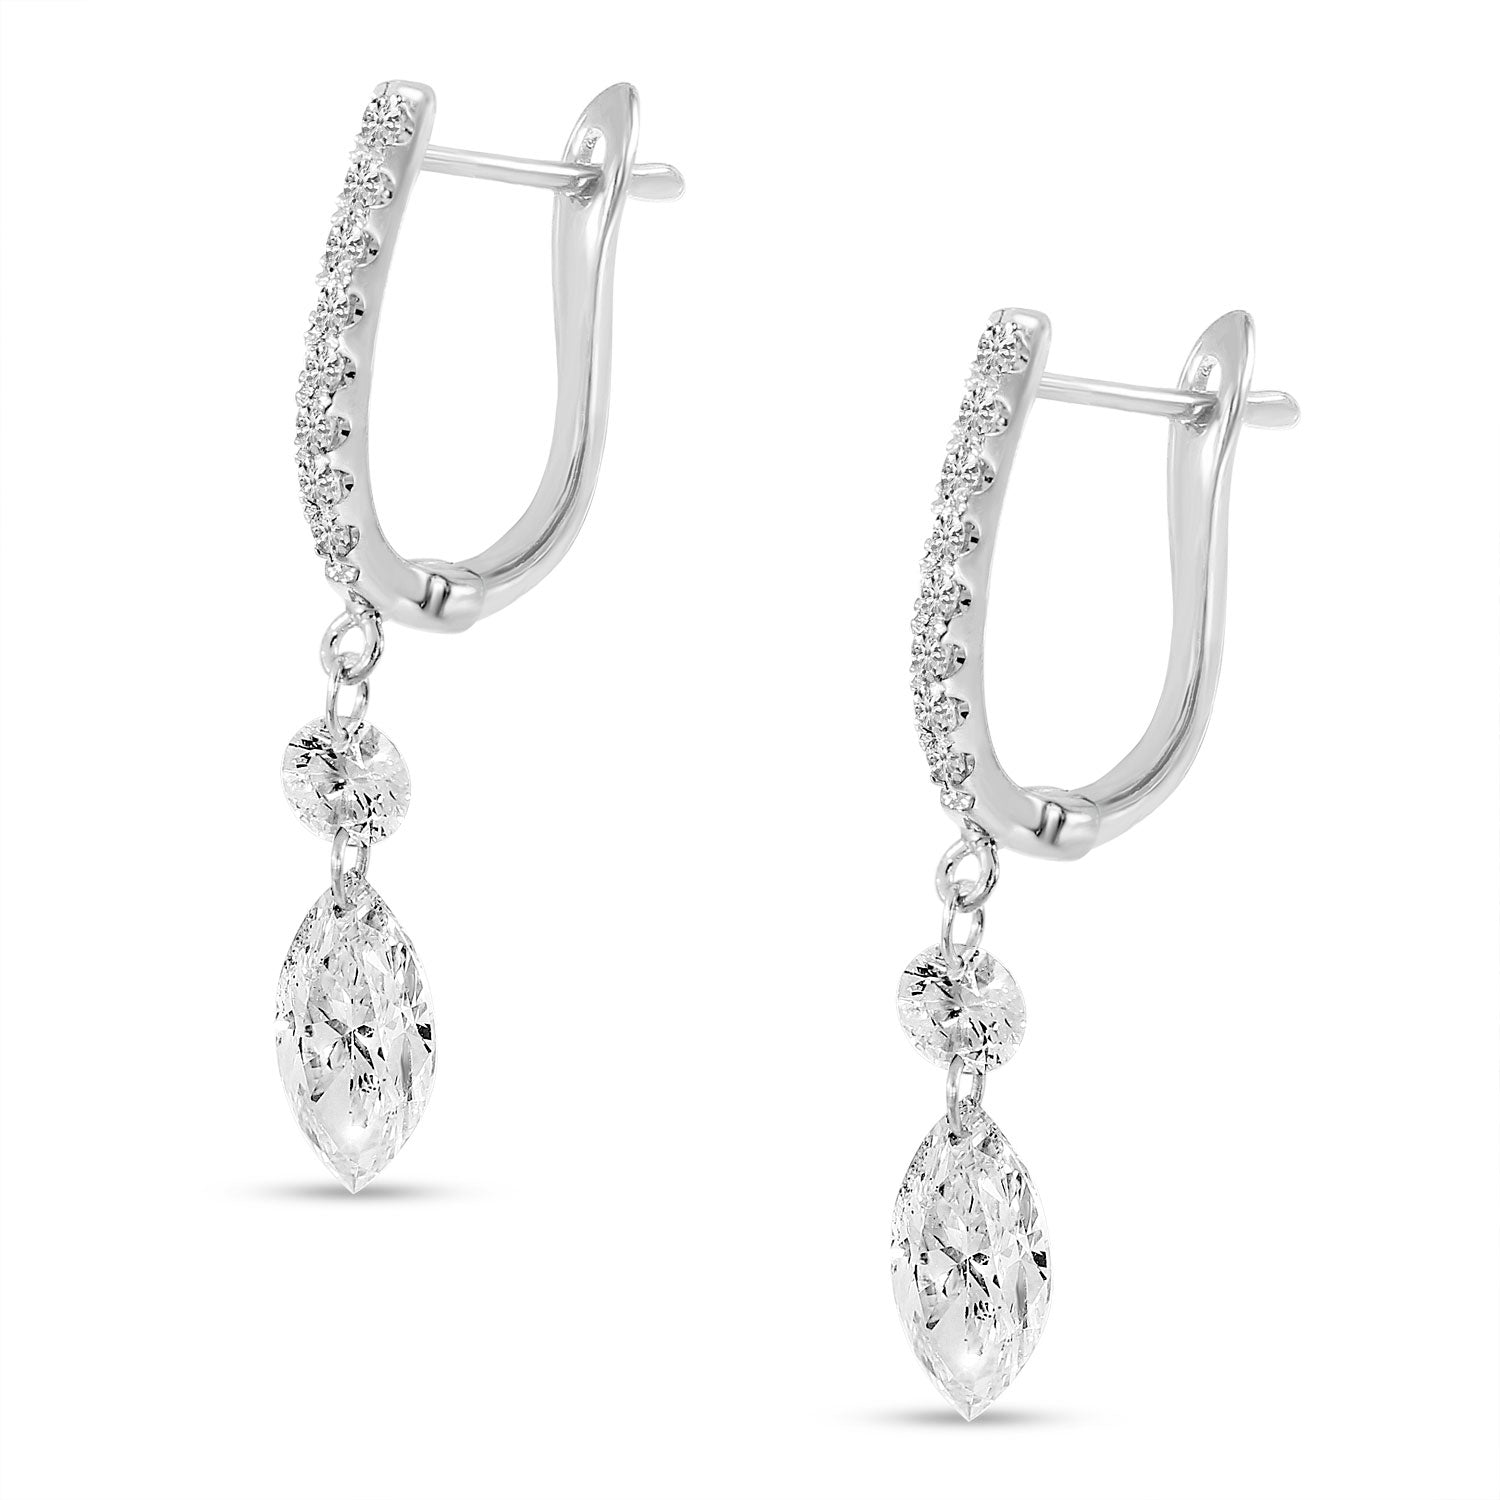 These mesmerizing diamonds sparkle and dance, ever-moving in joyful rhythms. Flawlessly set in 14k white gold, these Round graduated and fancy marquise cut diamonds total 1.13 cts. Enjoy their captivating swirls with modern lever back earrings, measuring 28.00mm in length.